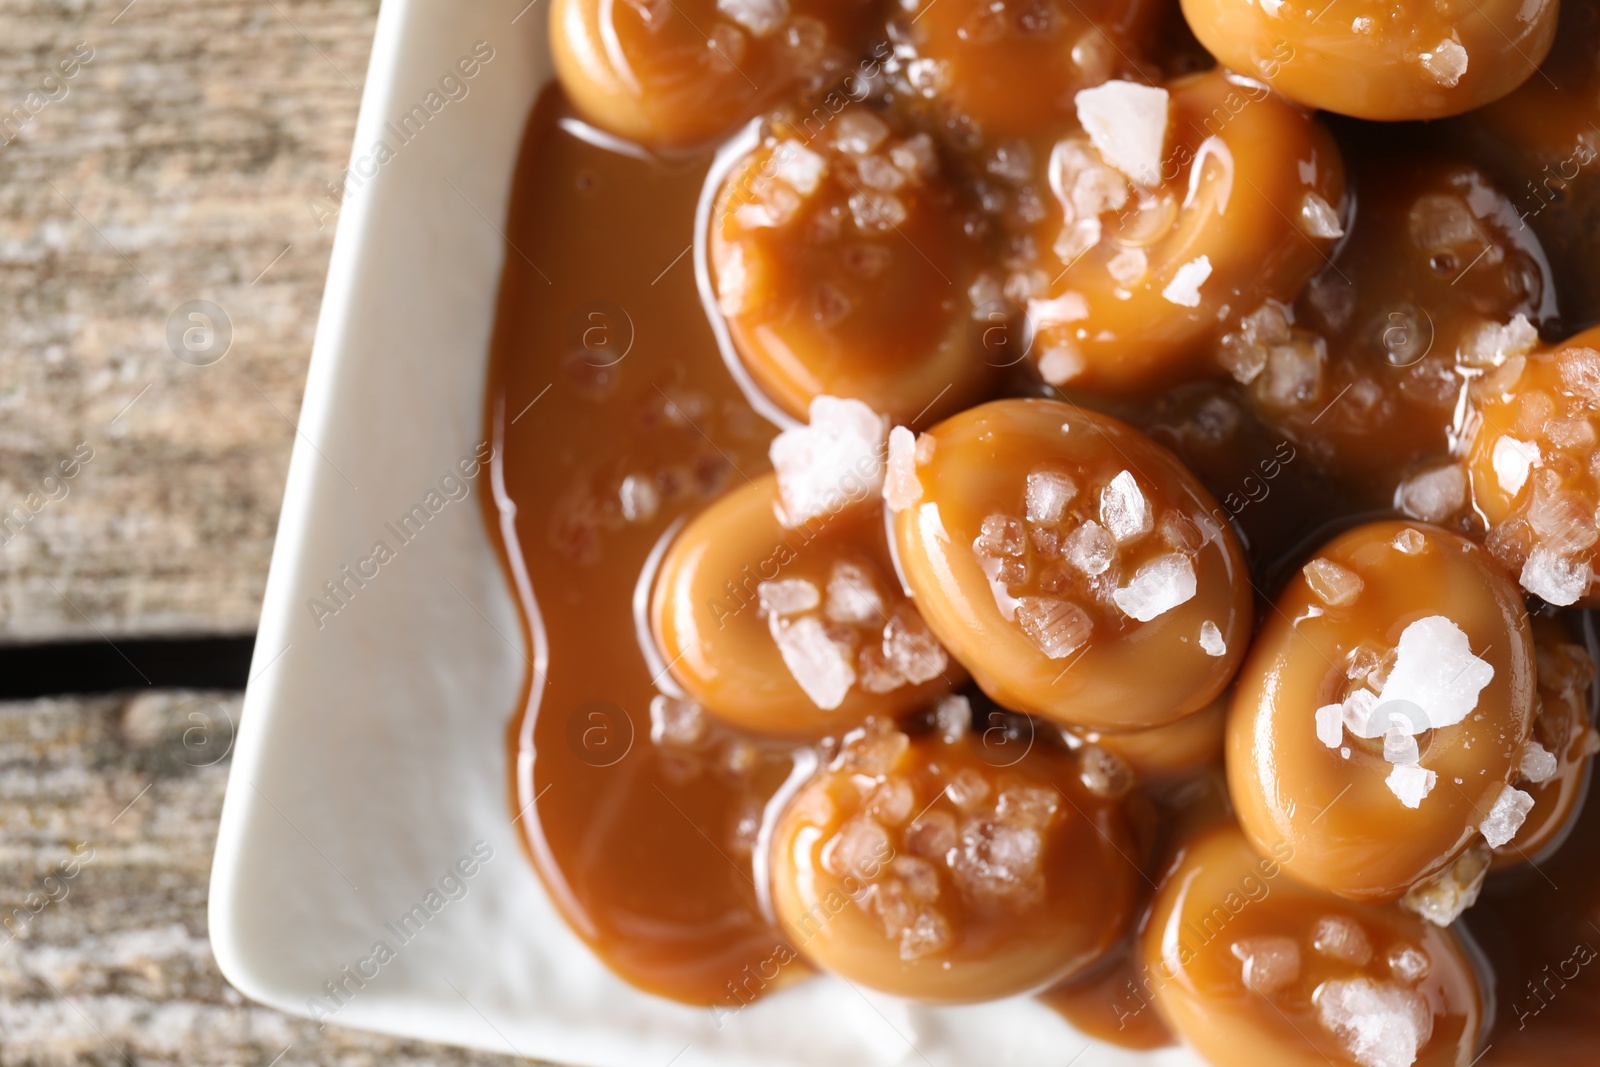 Photo of Tasty candies, caramel sauce and salt on wooden table, top view